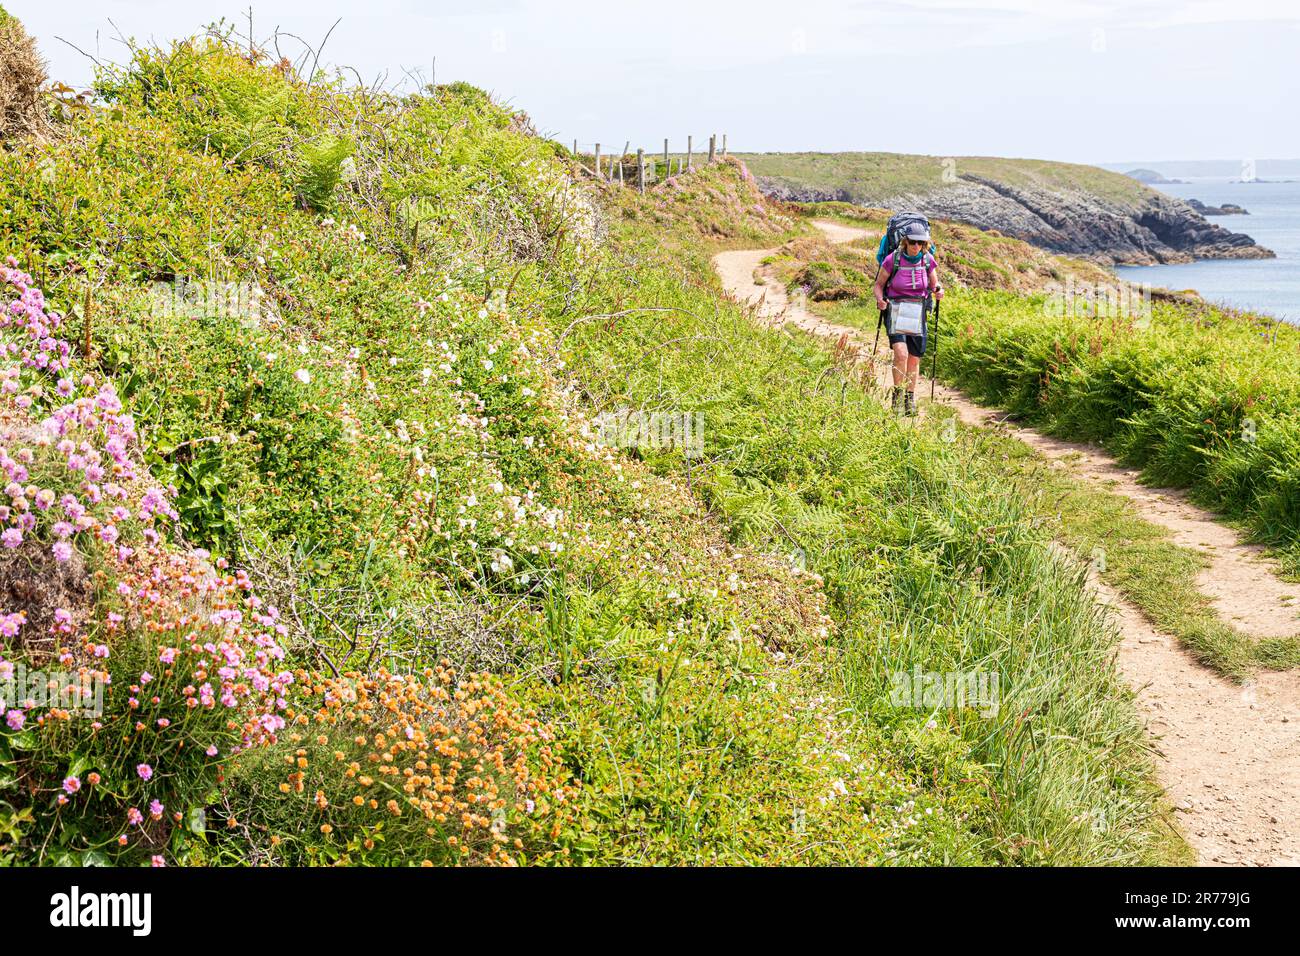 Female hiker walking on Pembrokeshire Coast Path National Trail at St Non's Bay on the St David's peninsula in the Pembrokeshire Coast National Park. Stock Photo